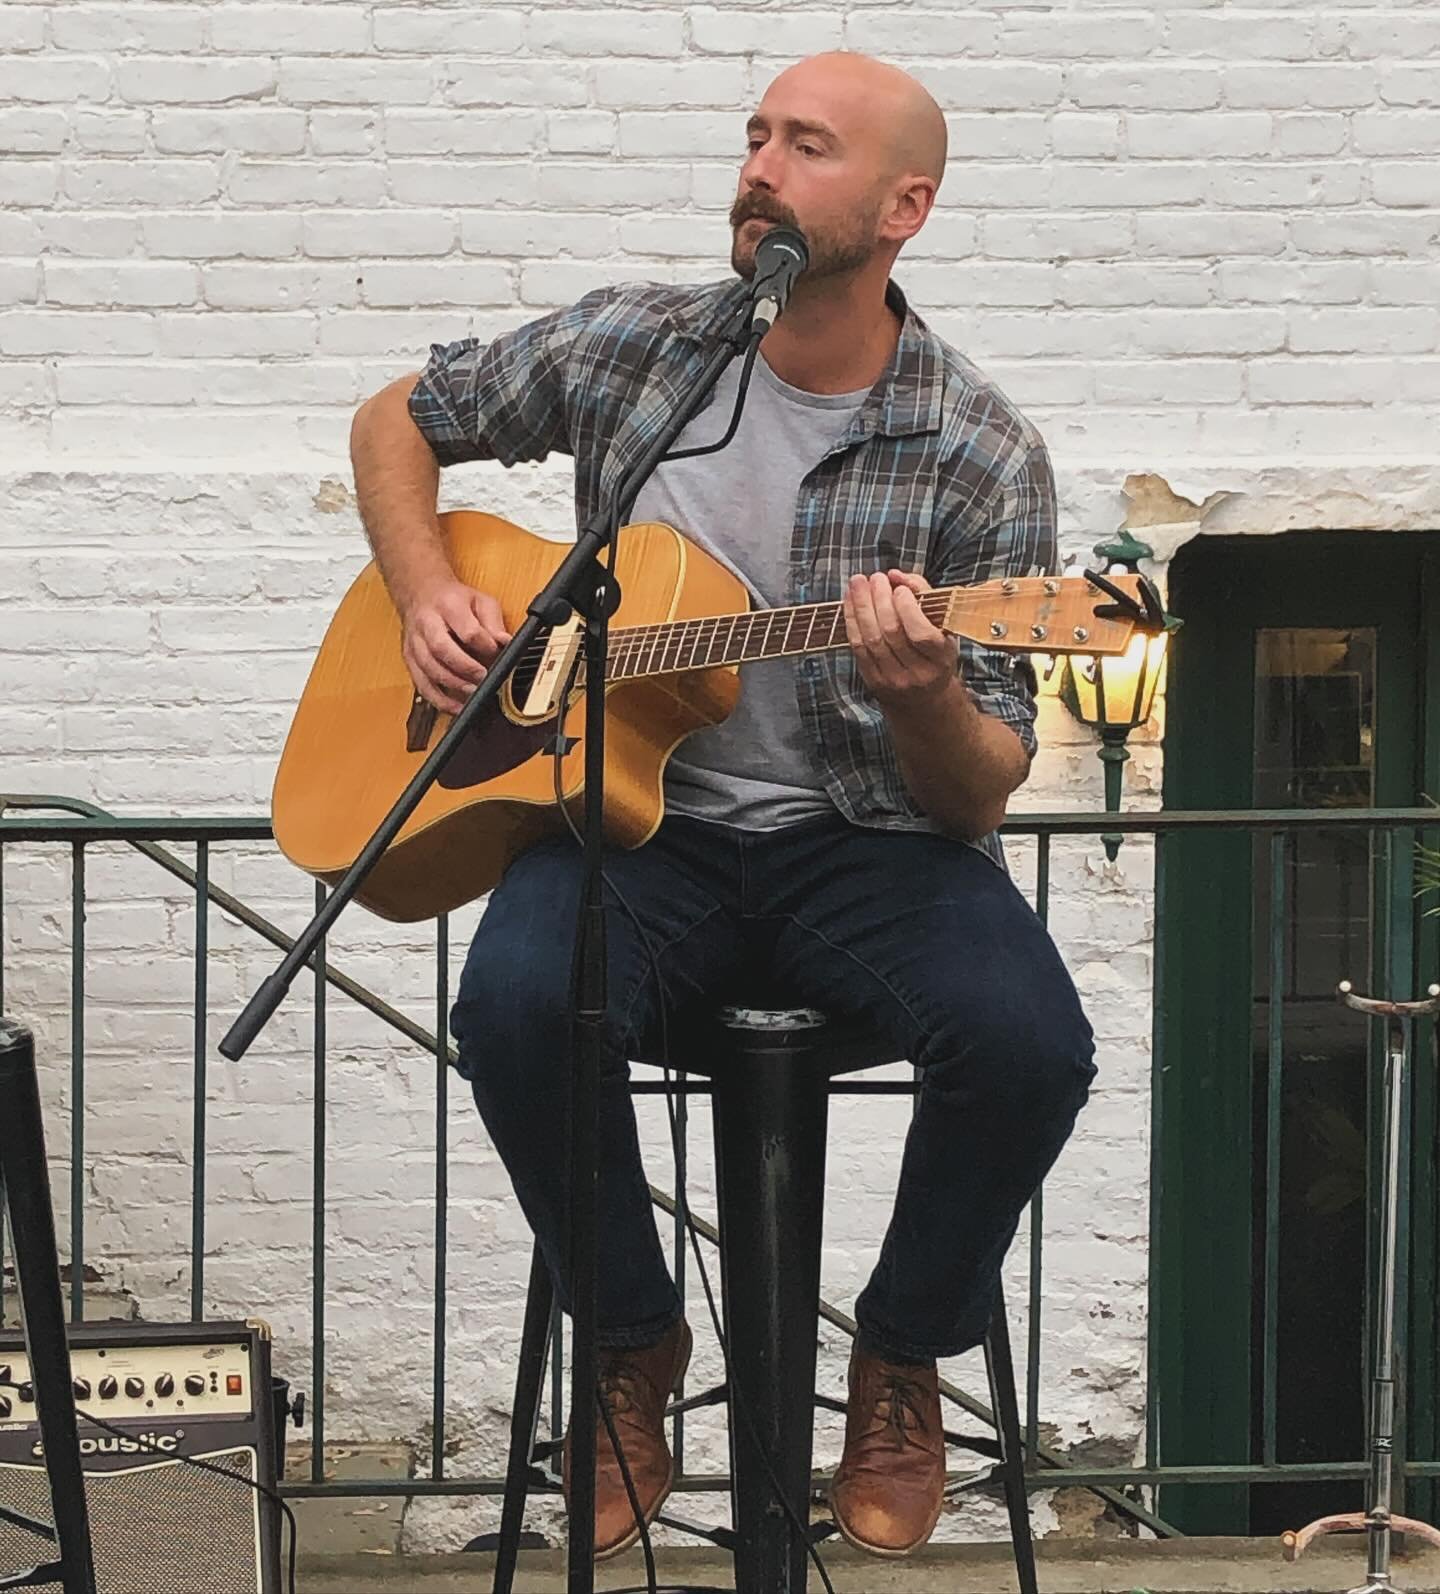 Saturday, April 27 from 6-9 at The Owl. Mr. Andre Atkinson strummin&rsquo; that pain with his fingers. The weather is getting nicer, it&rsquo;s restaurant week, all the perfect excuses to come out and play. And if i don&rsquo;t say so myself, our res